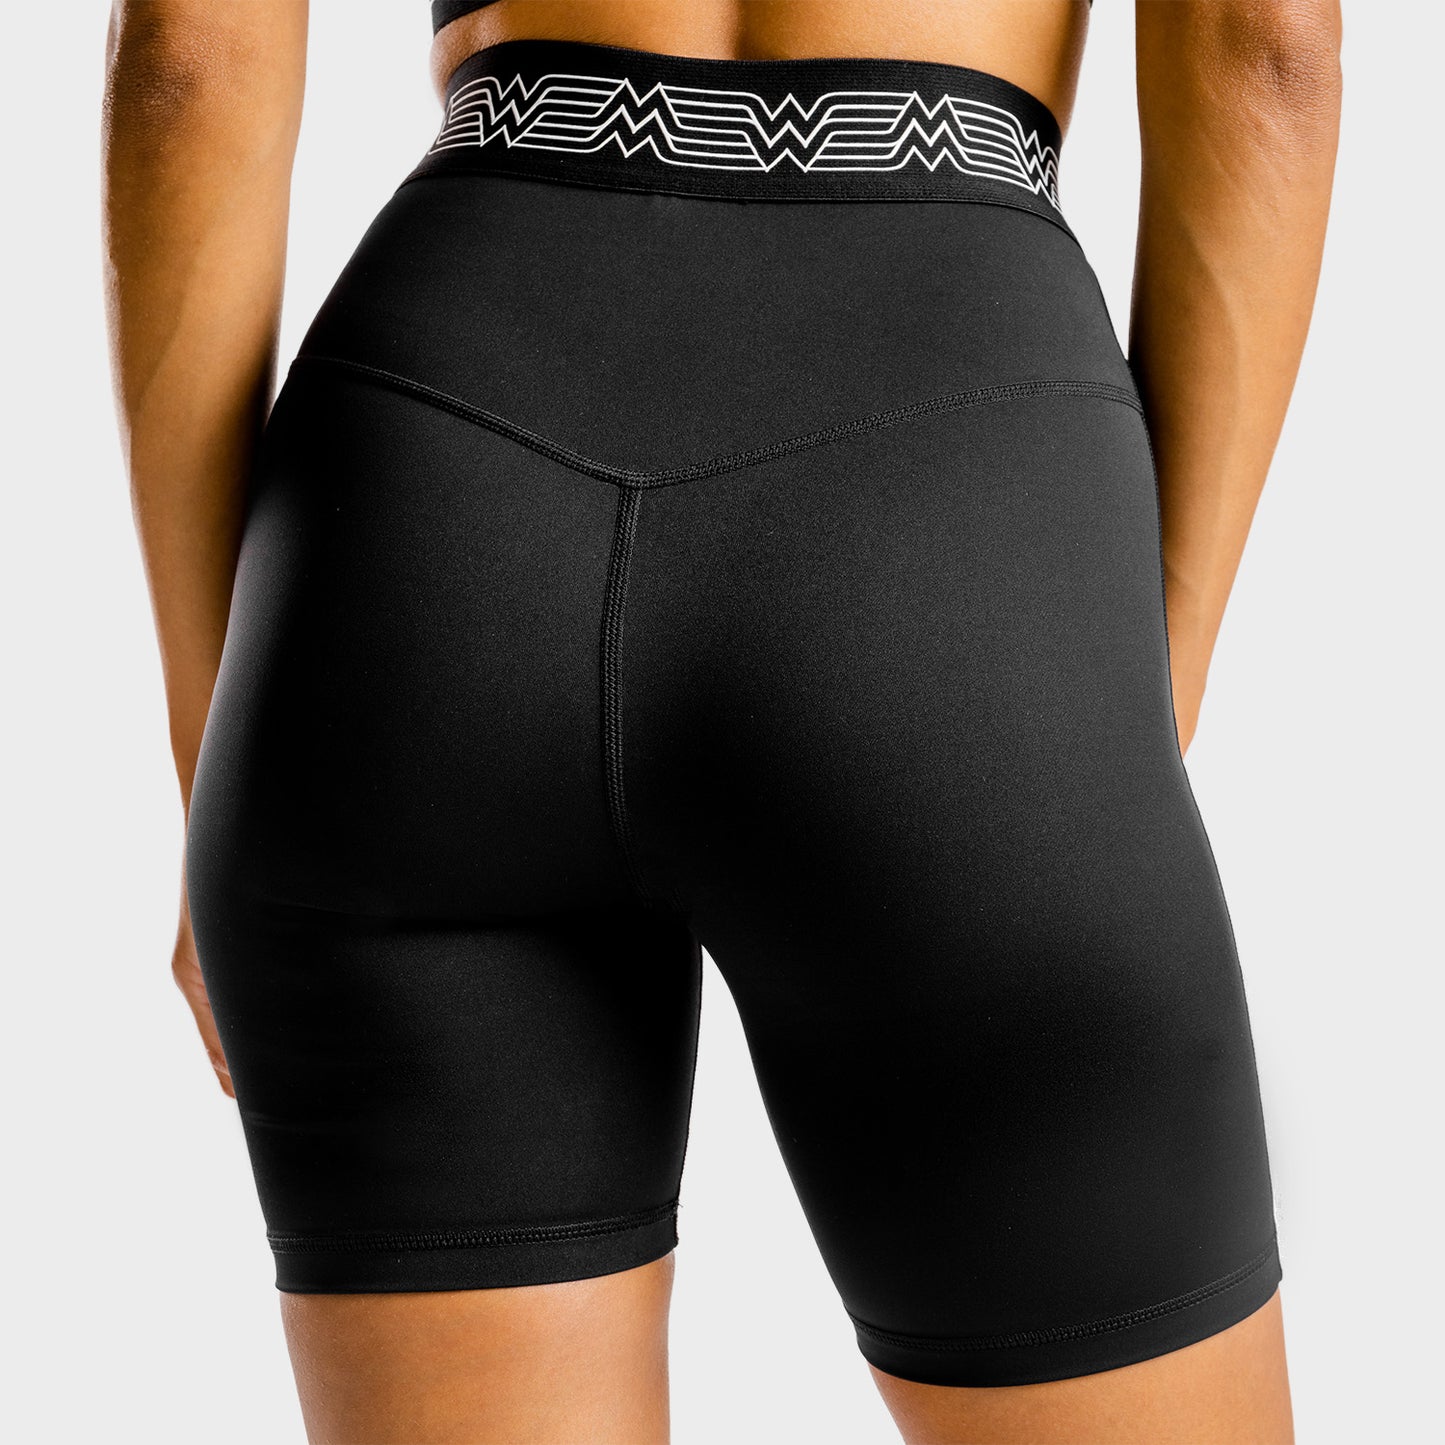 squatwolf-gym-shorts-for-women-wonder-woman-cycling-shorts-black-workout-clothes